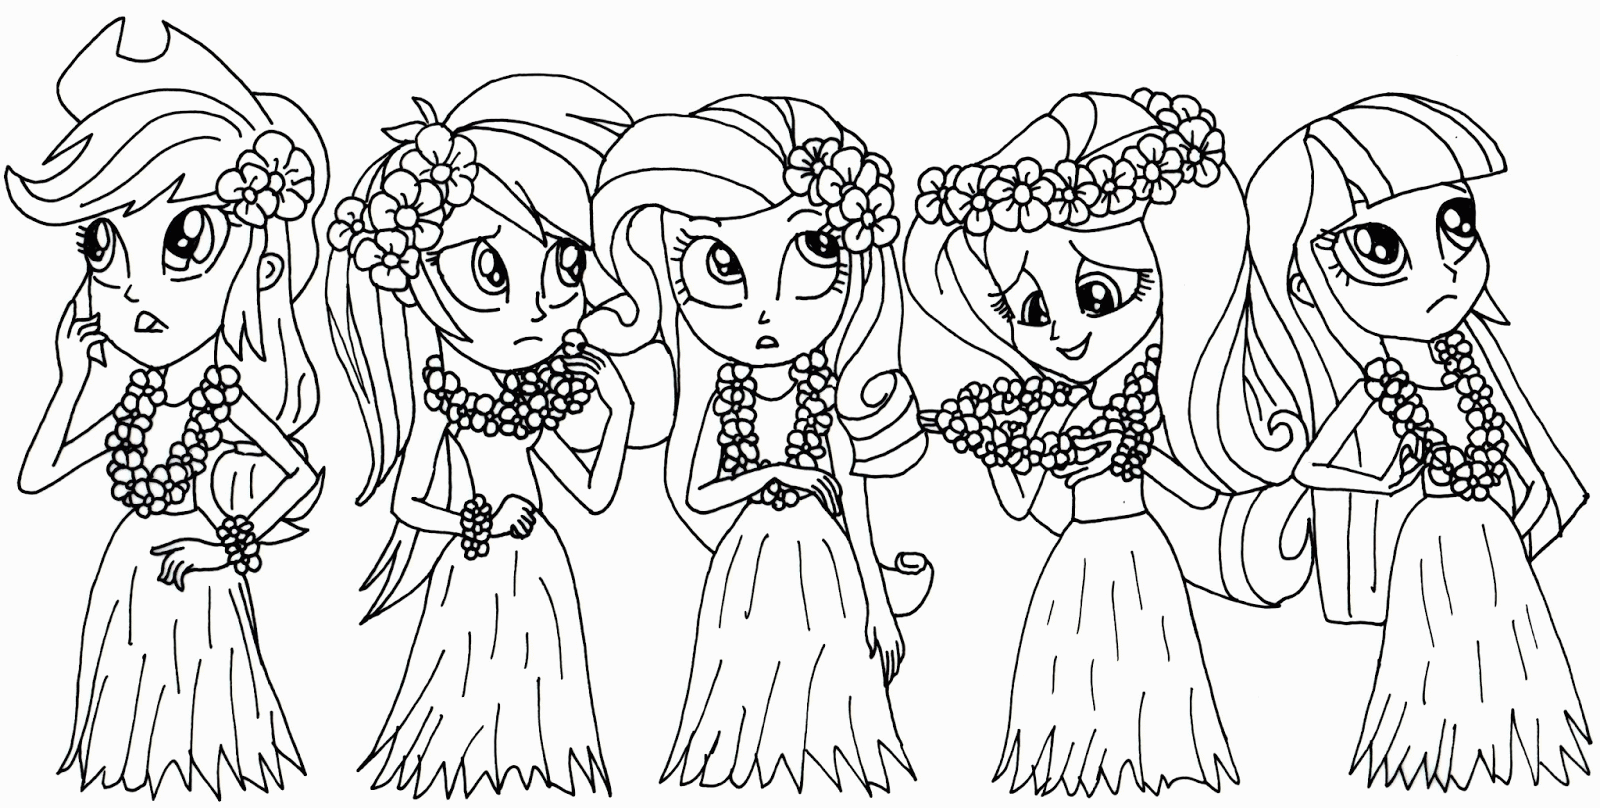 Free Printable My Little Pony Coloring Pages: My Little Pony